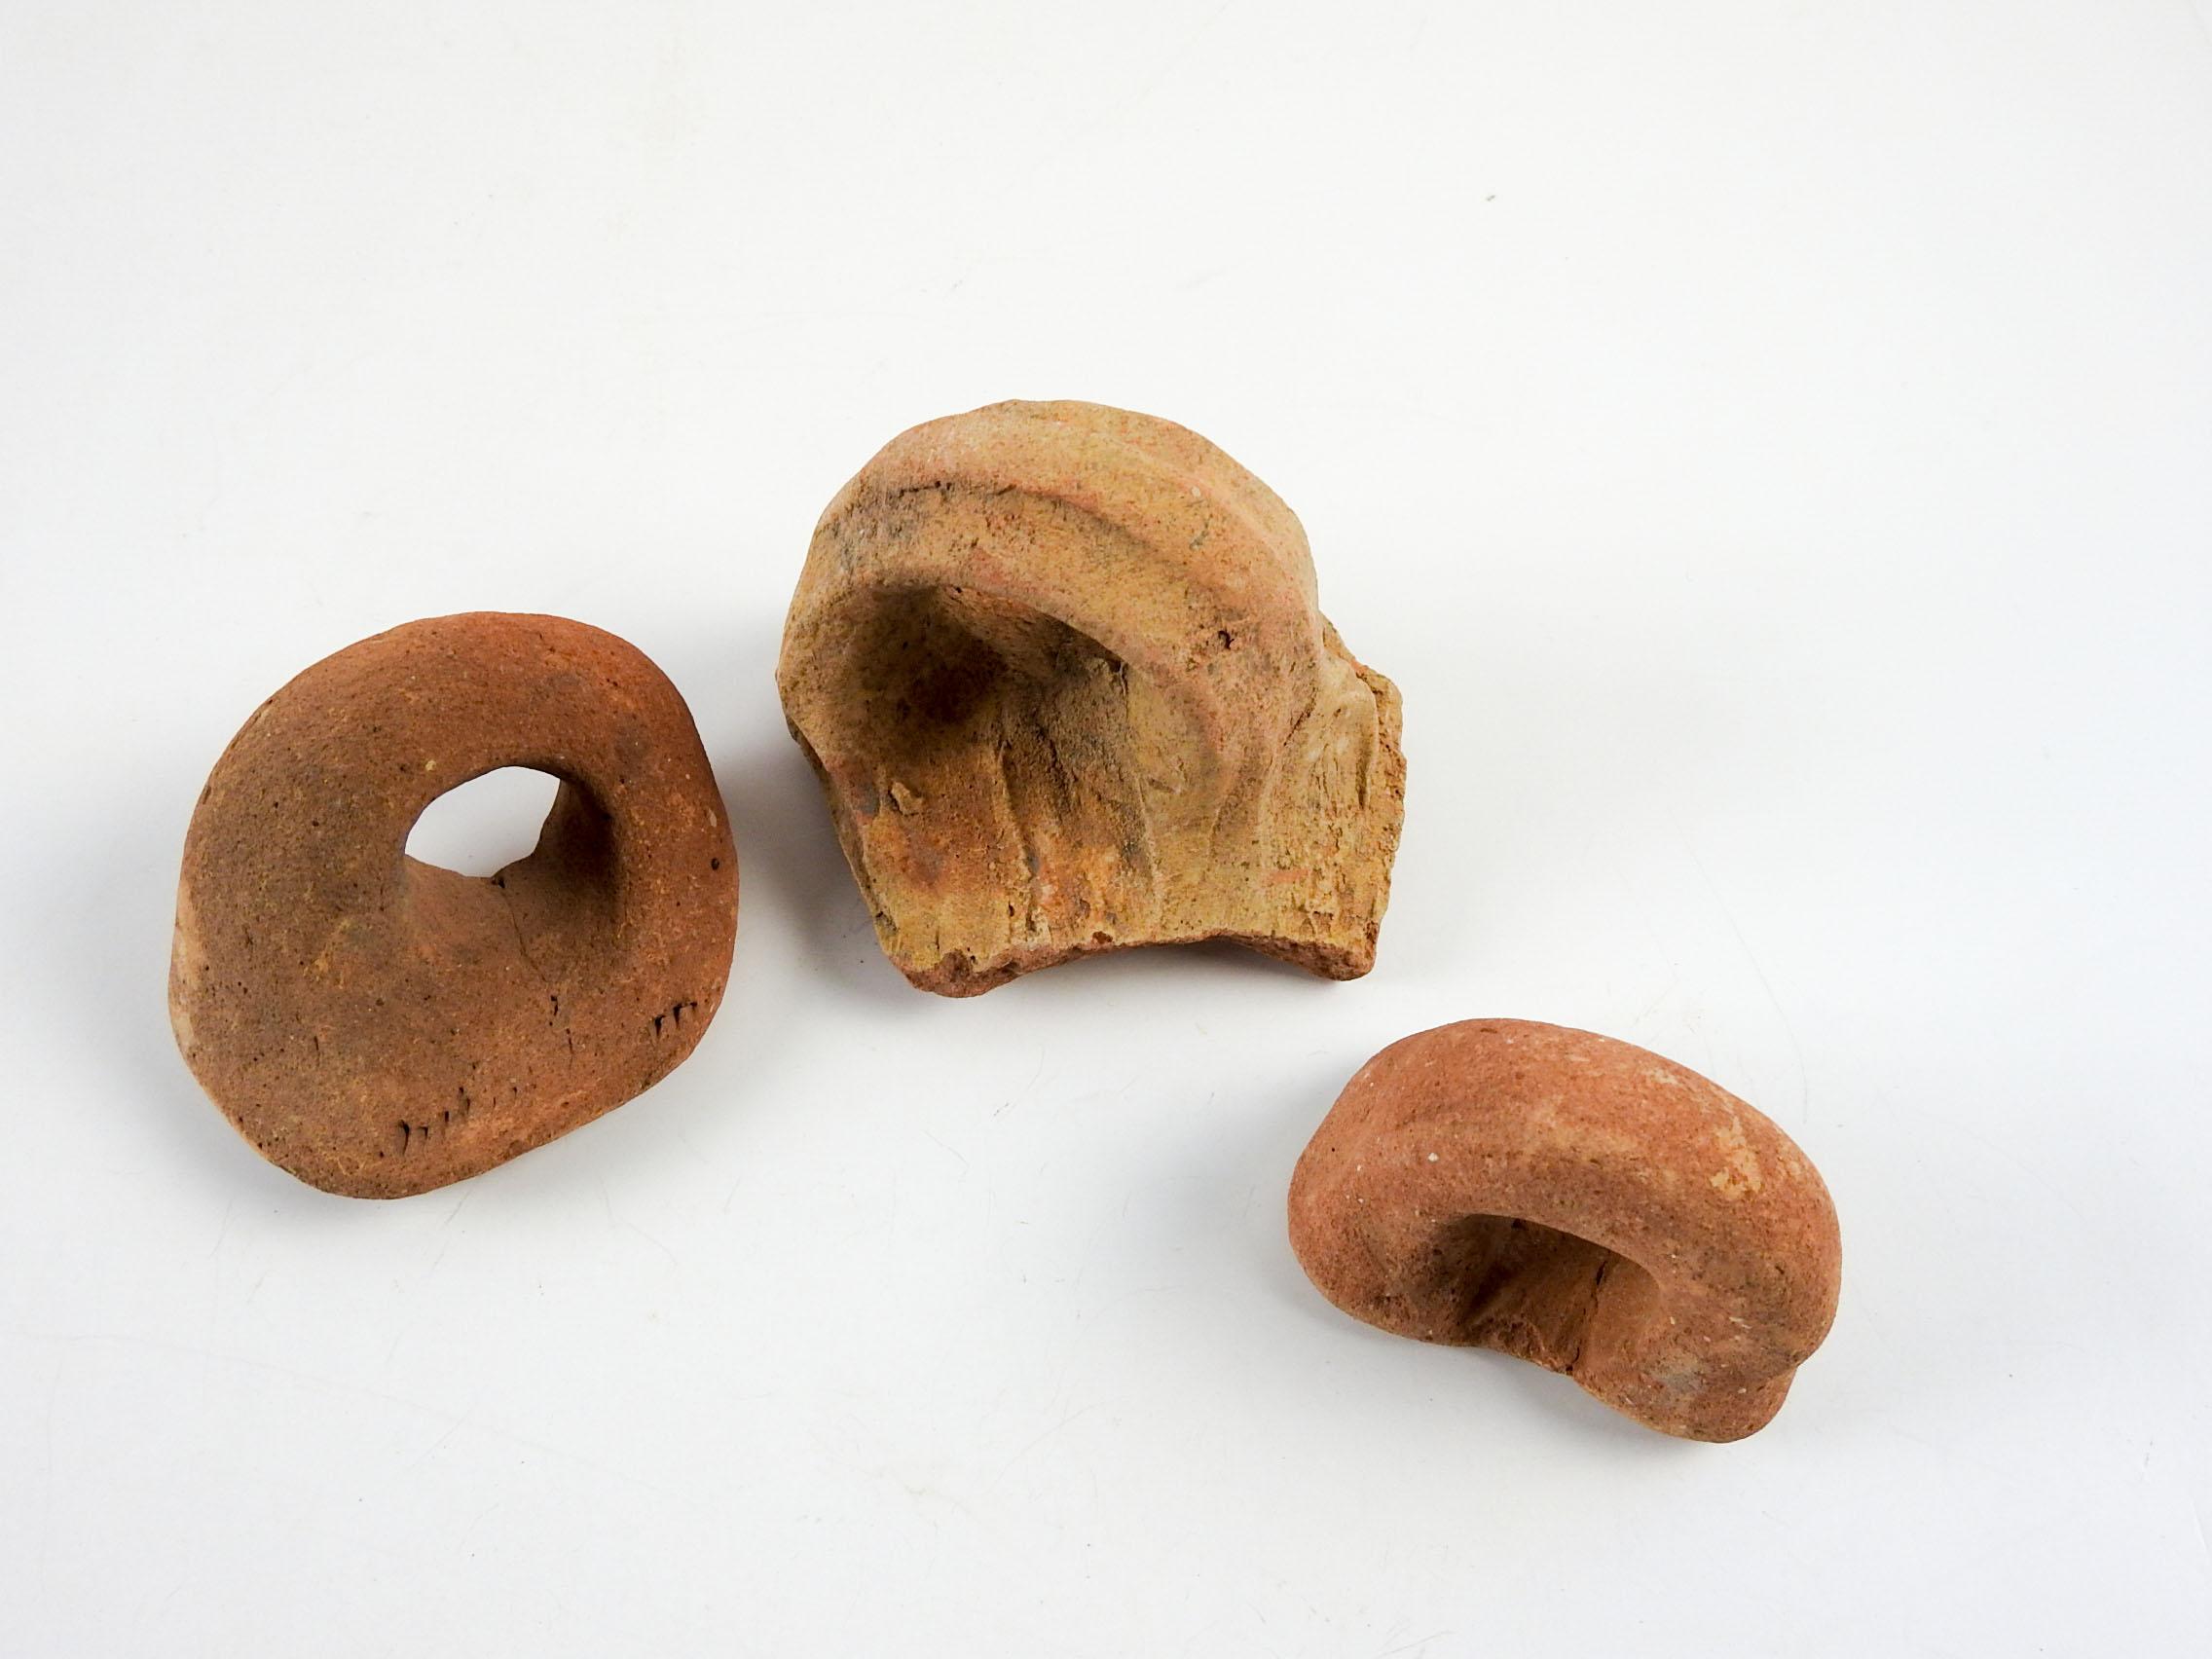 Group of 3 ancient Mediterranean terracotta pottery handle fragments . I have several sets of these, colors vary from brownish to reddish, size and overall wear will vary. Largest fragment is about 3.5